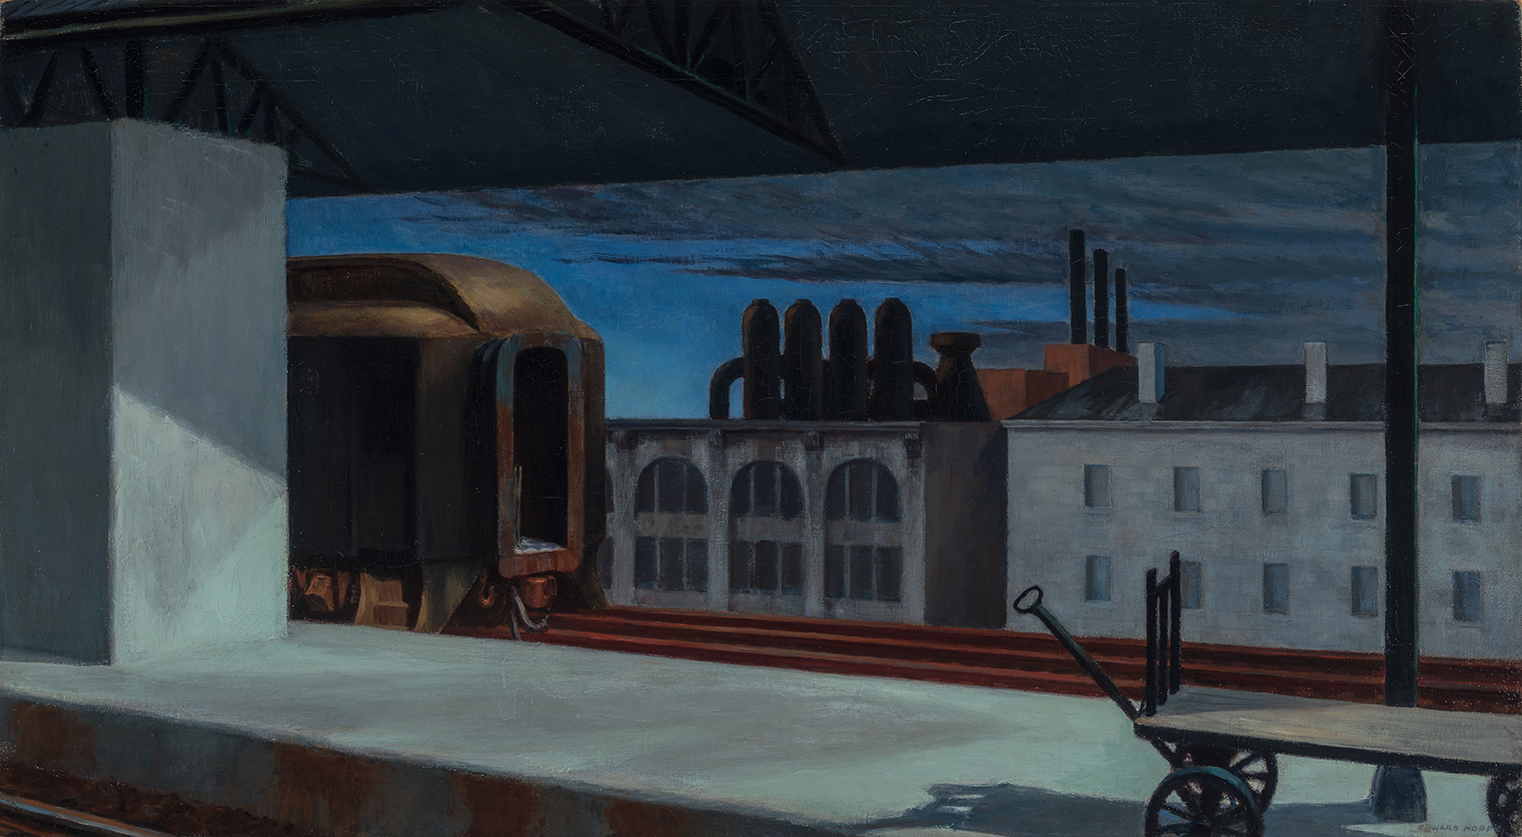 Edward Hopper, Dawn in Pennsylvania, 1942, on show in America's Cool Modernism at the Ashmolean until 22 July Â© Heirs of Josephine N. Hopper, licensed by the Whitney Museum of American Art